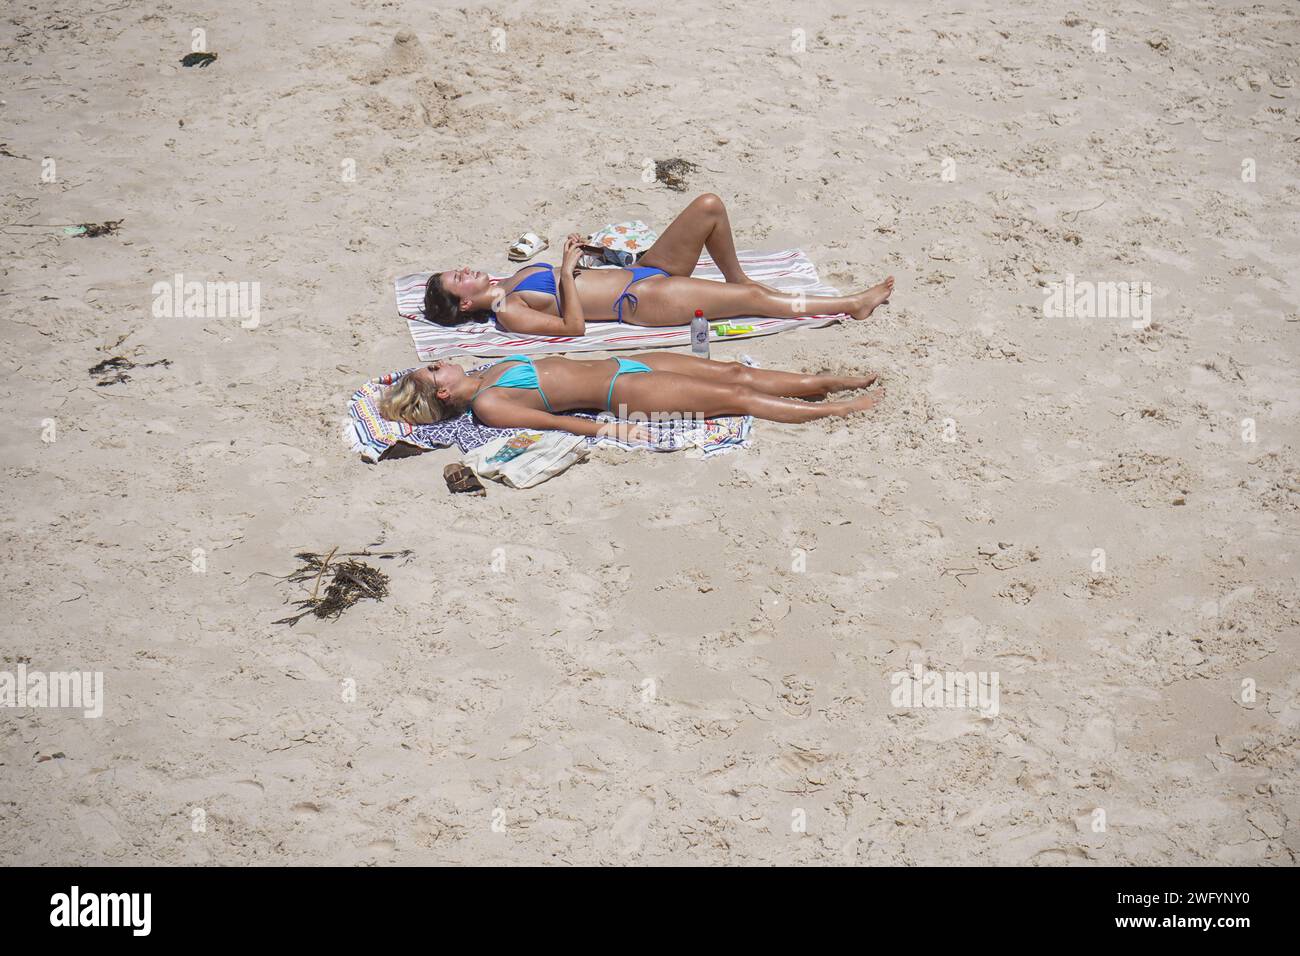 Adelaide, SA Australia 2 February 2024 . Women sunbathing on a hot day  in Adelaide as temperatures reach above 31celsius.According to the Australian Institute of Health and Welfare more than 430,000 people are annually diagnosed with non-melanoma skin cancer Australians have been urged to exercise sun safety. Credit: amer ghazzal/Alamy Live News Stock Photo